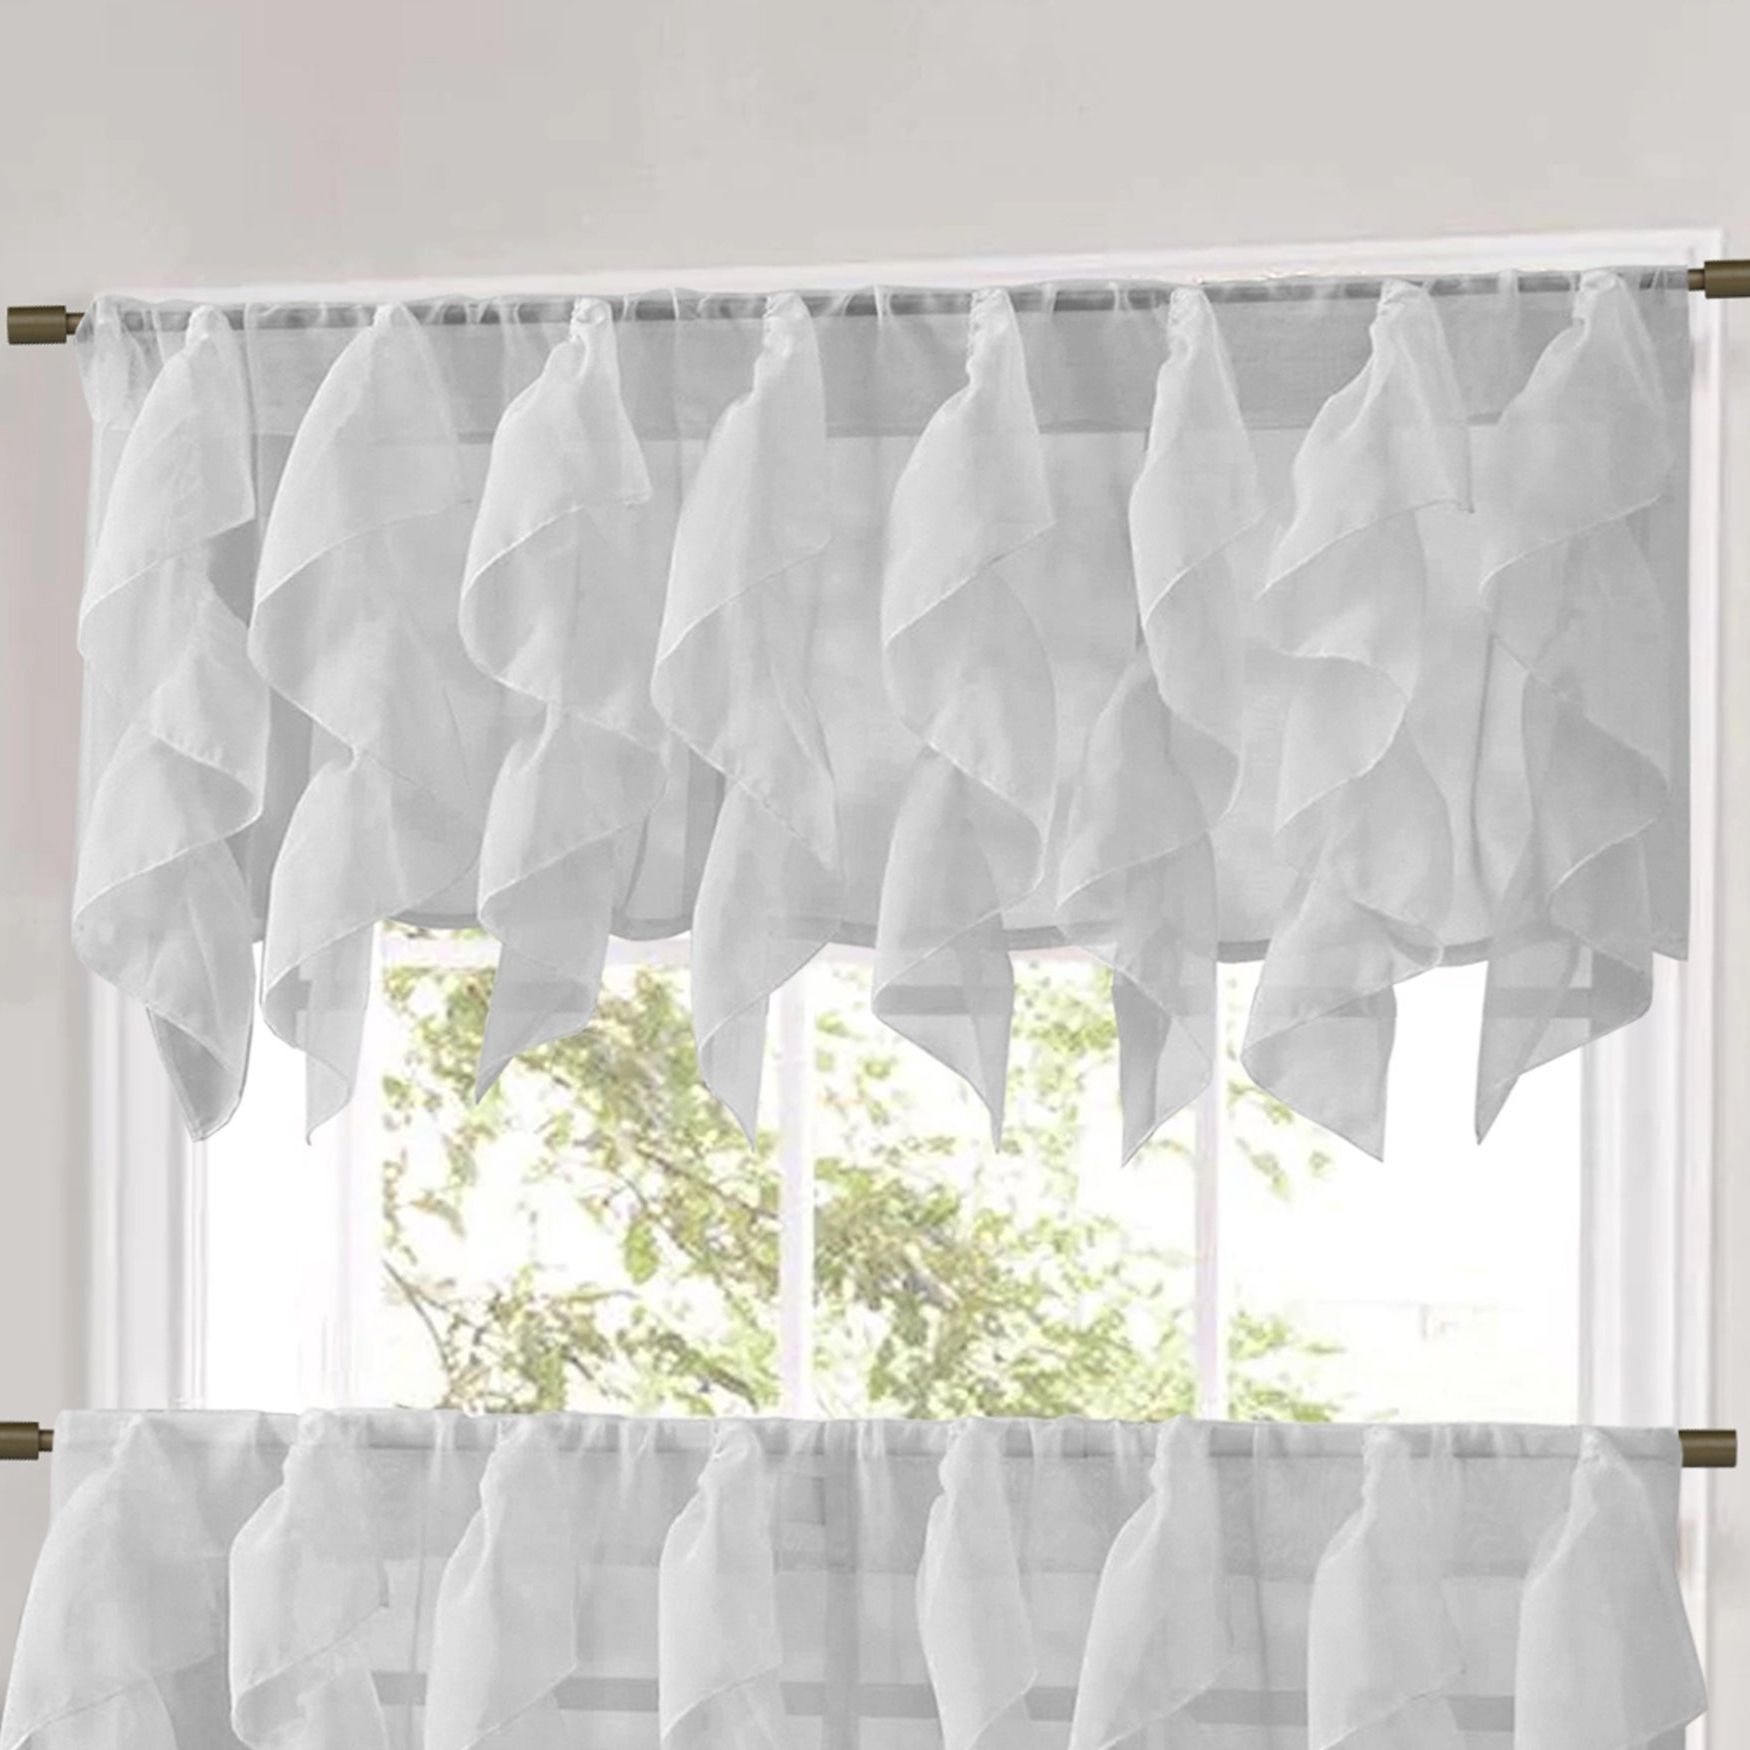 Sweet Home Collection Silver Vertical Ruffled Waterfall Valance And Curtain  Tiers In Popular Navy Vertical Ruffled Waterfall Valance And Curtain Tiers (View 7 of 20)